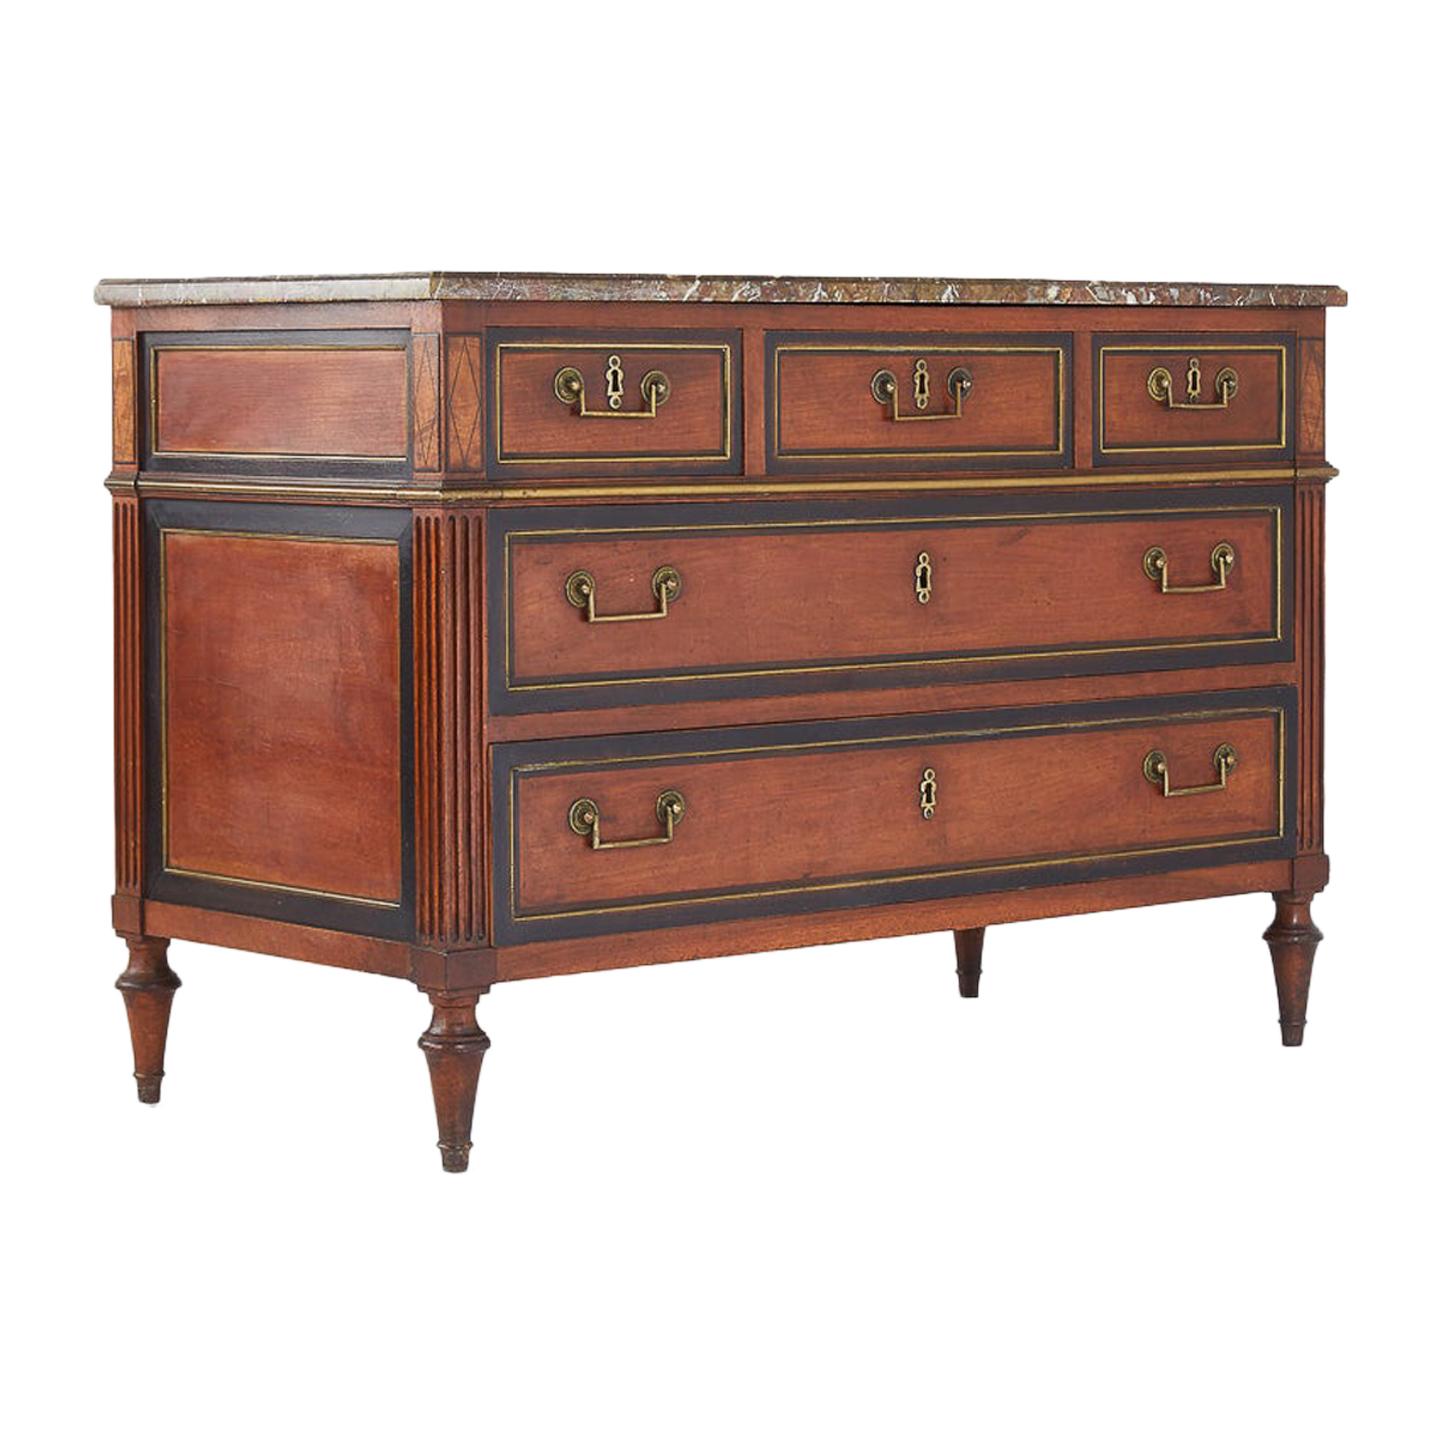 Late 18th Century French Cherrywood Commode